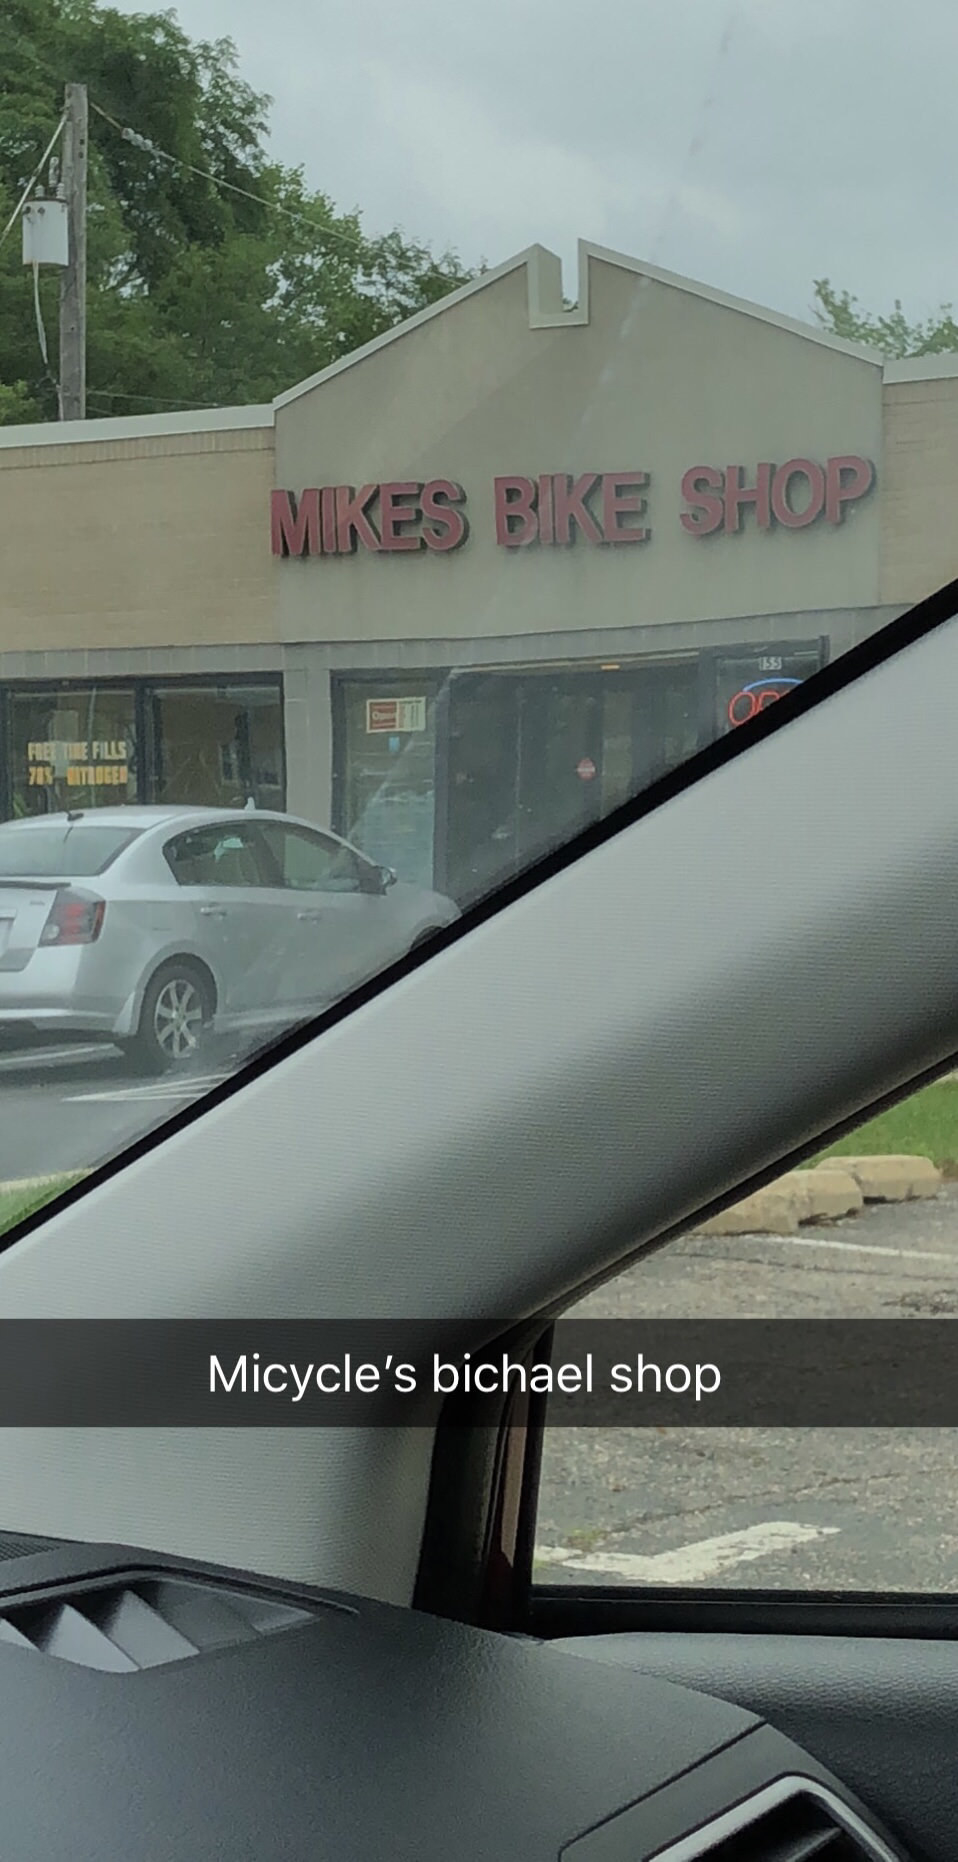 place named michael&#x27;s bike shop and they call it micycle&#x27;s bichael shop